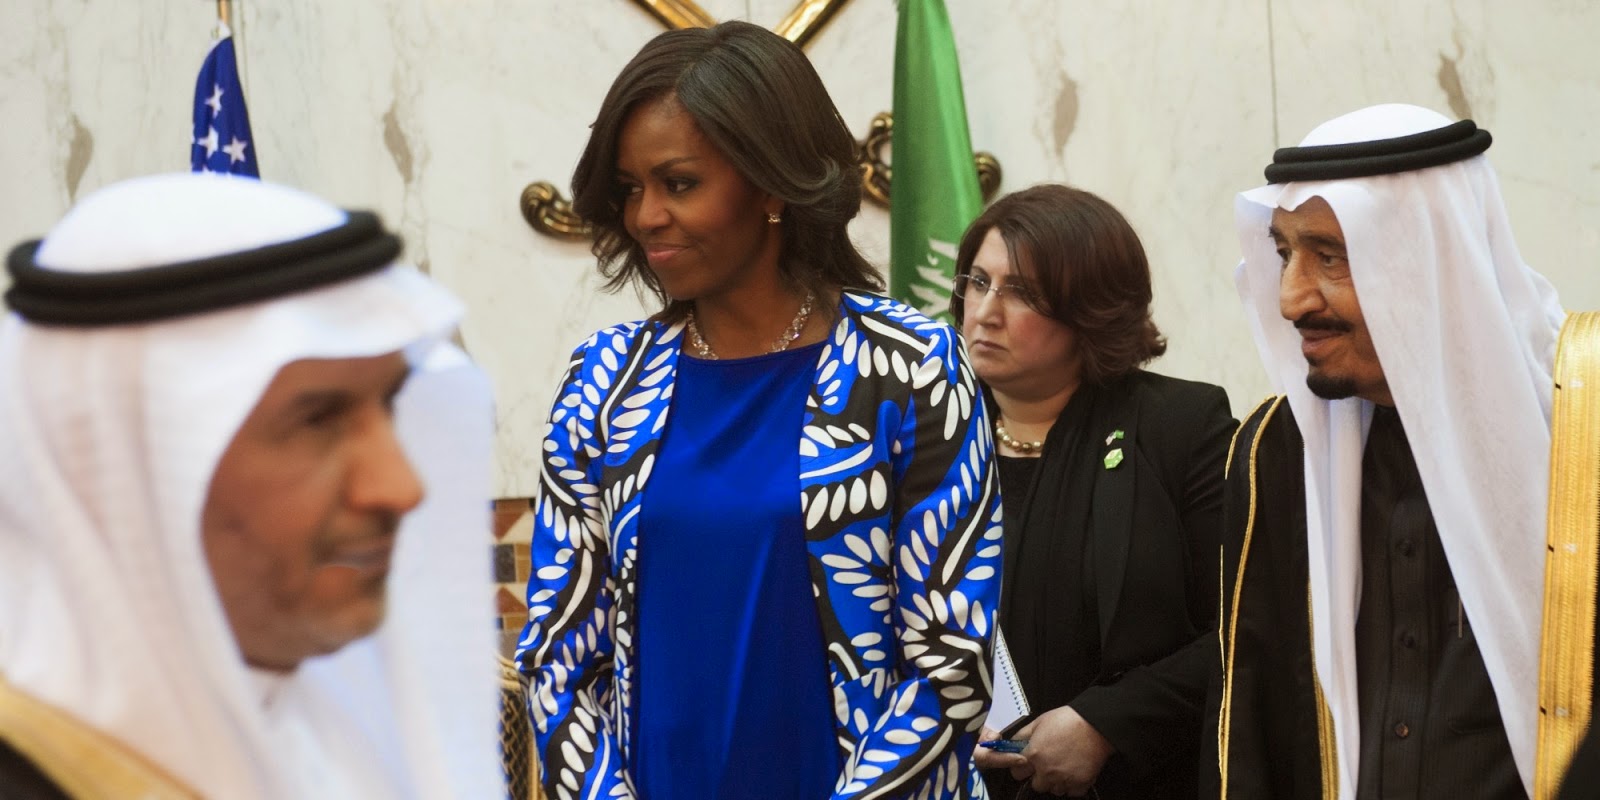 Some Saudis criticized Michelle Obama's decision not to cover her head on her Saudi visit